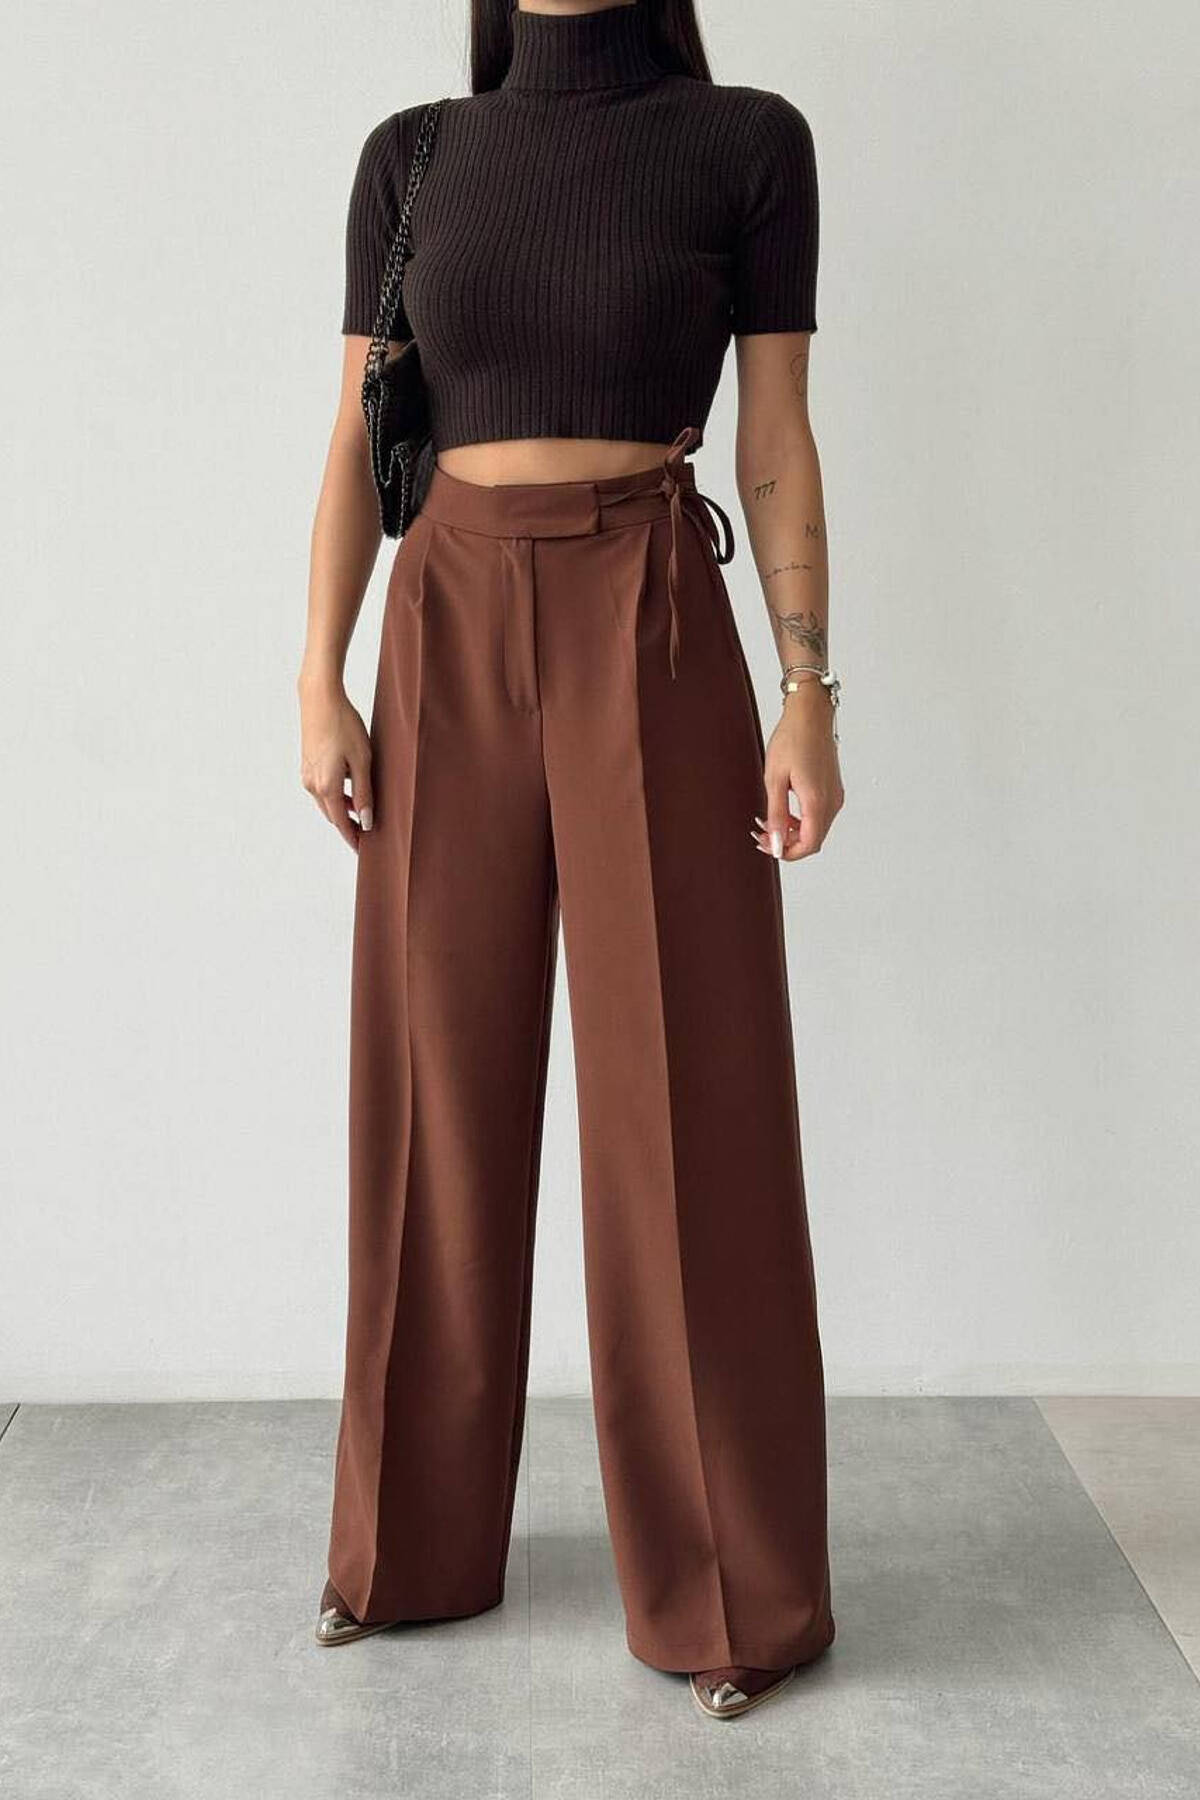 LACING WIDE LEG WOMAN TROUSERS BROWN/KAFE TROUSERS BS-7351